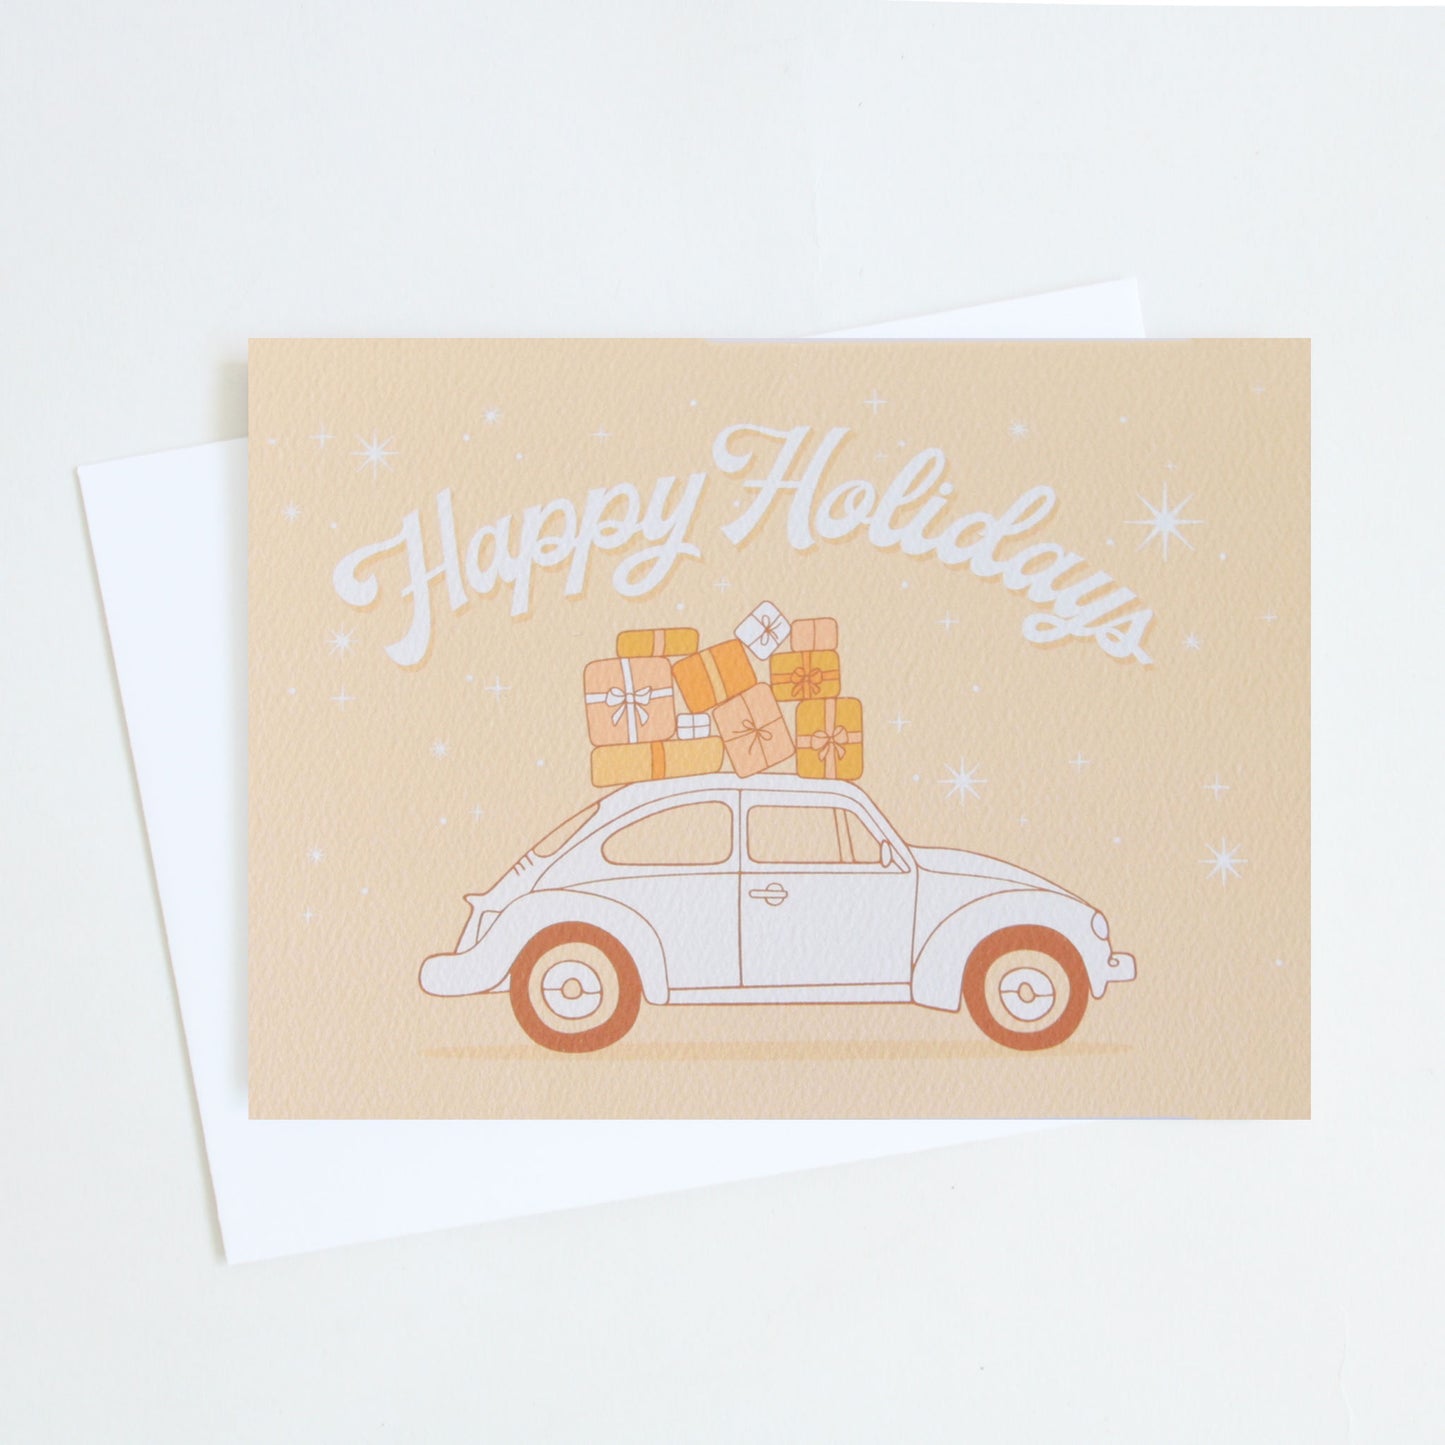 A light orange/yellow card with a graphic of a VW bug with holiday gifts stacked on top along with the words, "Happy Holidays" in a cream colored font.